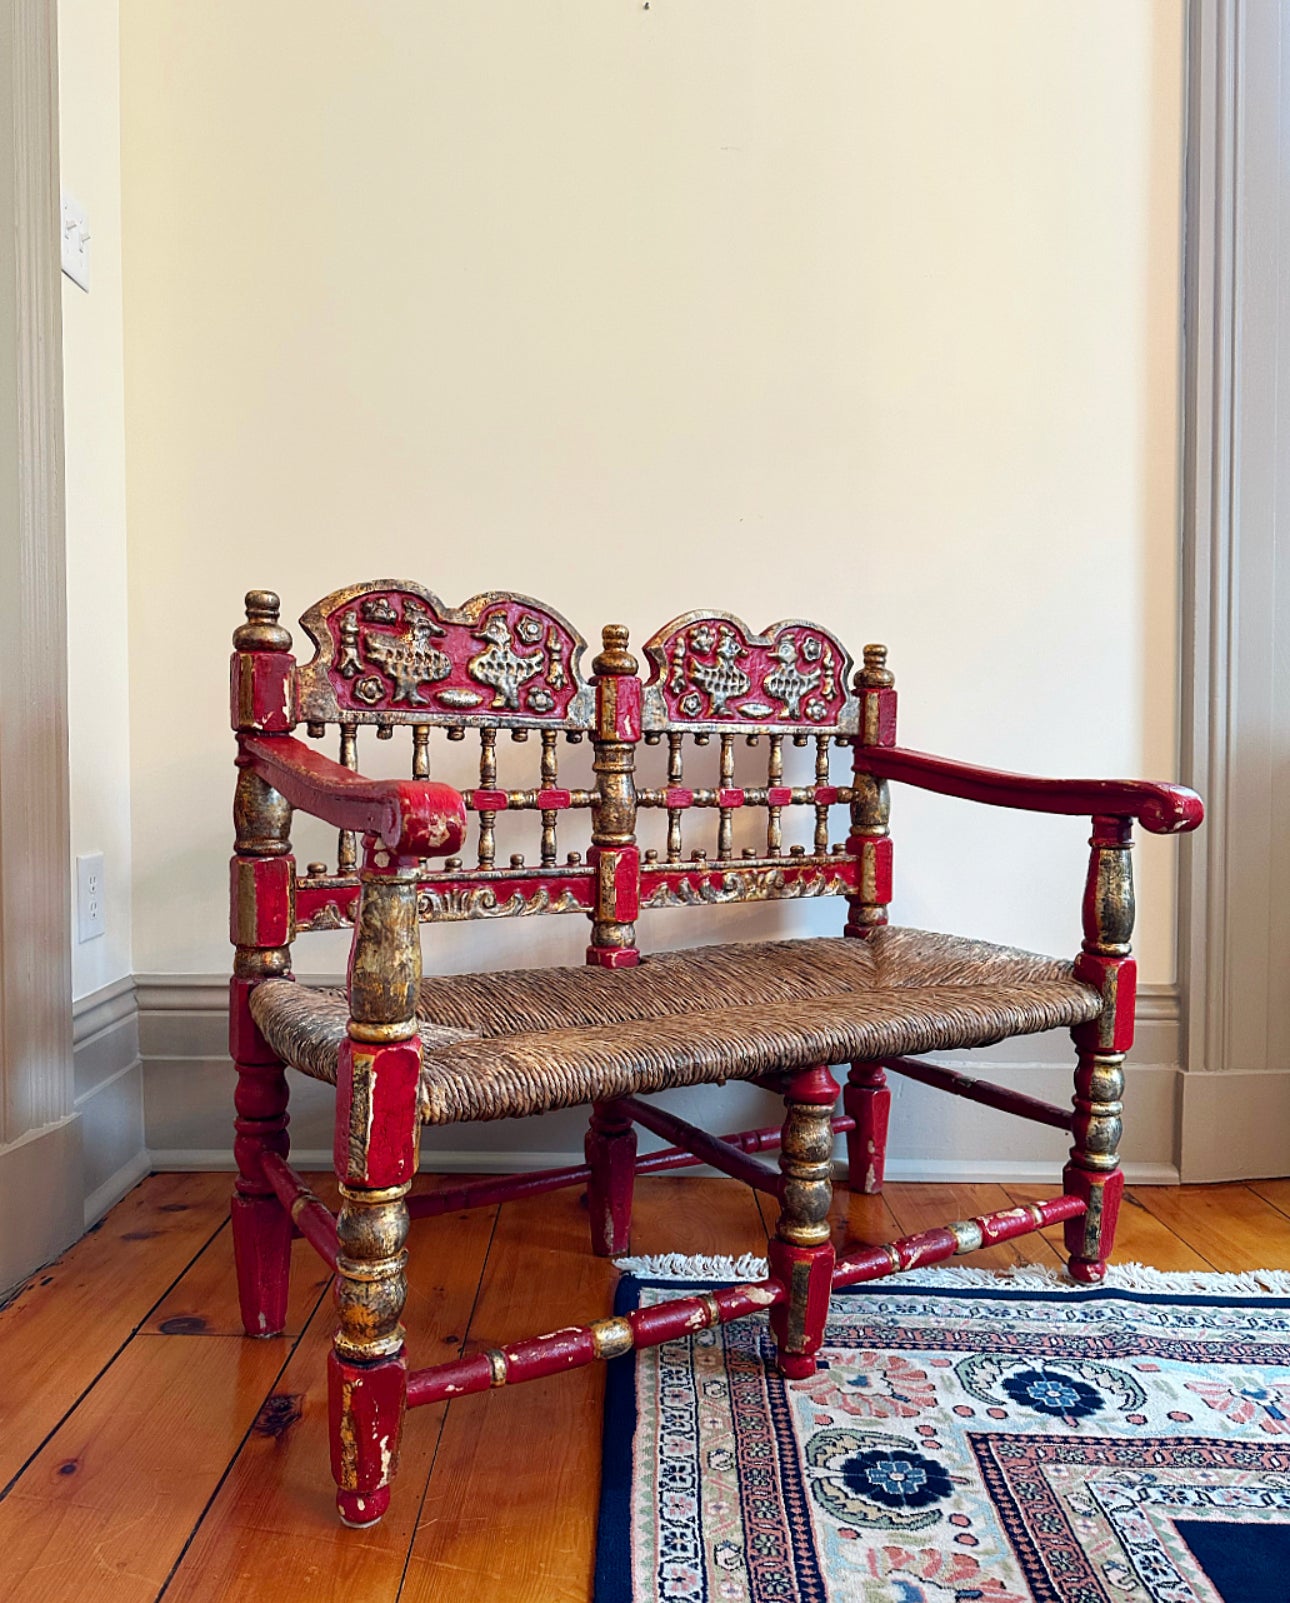 19th Century Spanish Andalusian Polychrome Red and Gold Bench